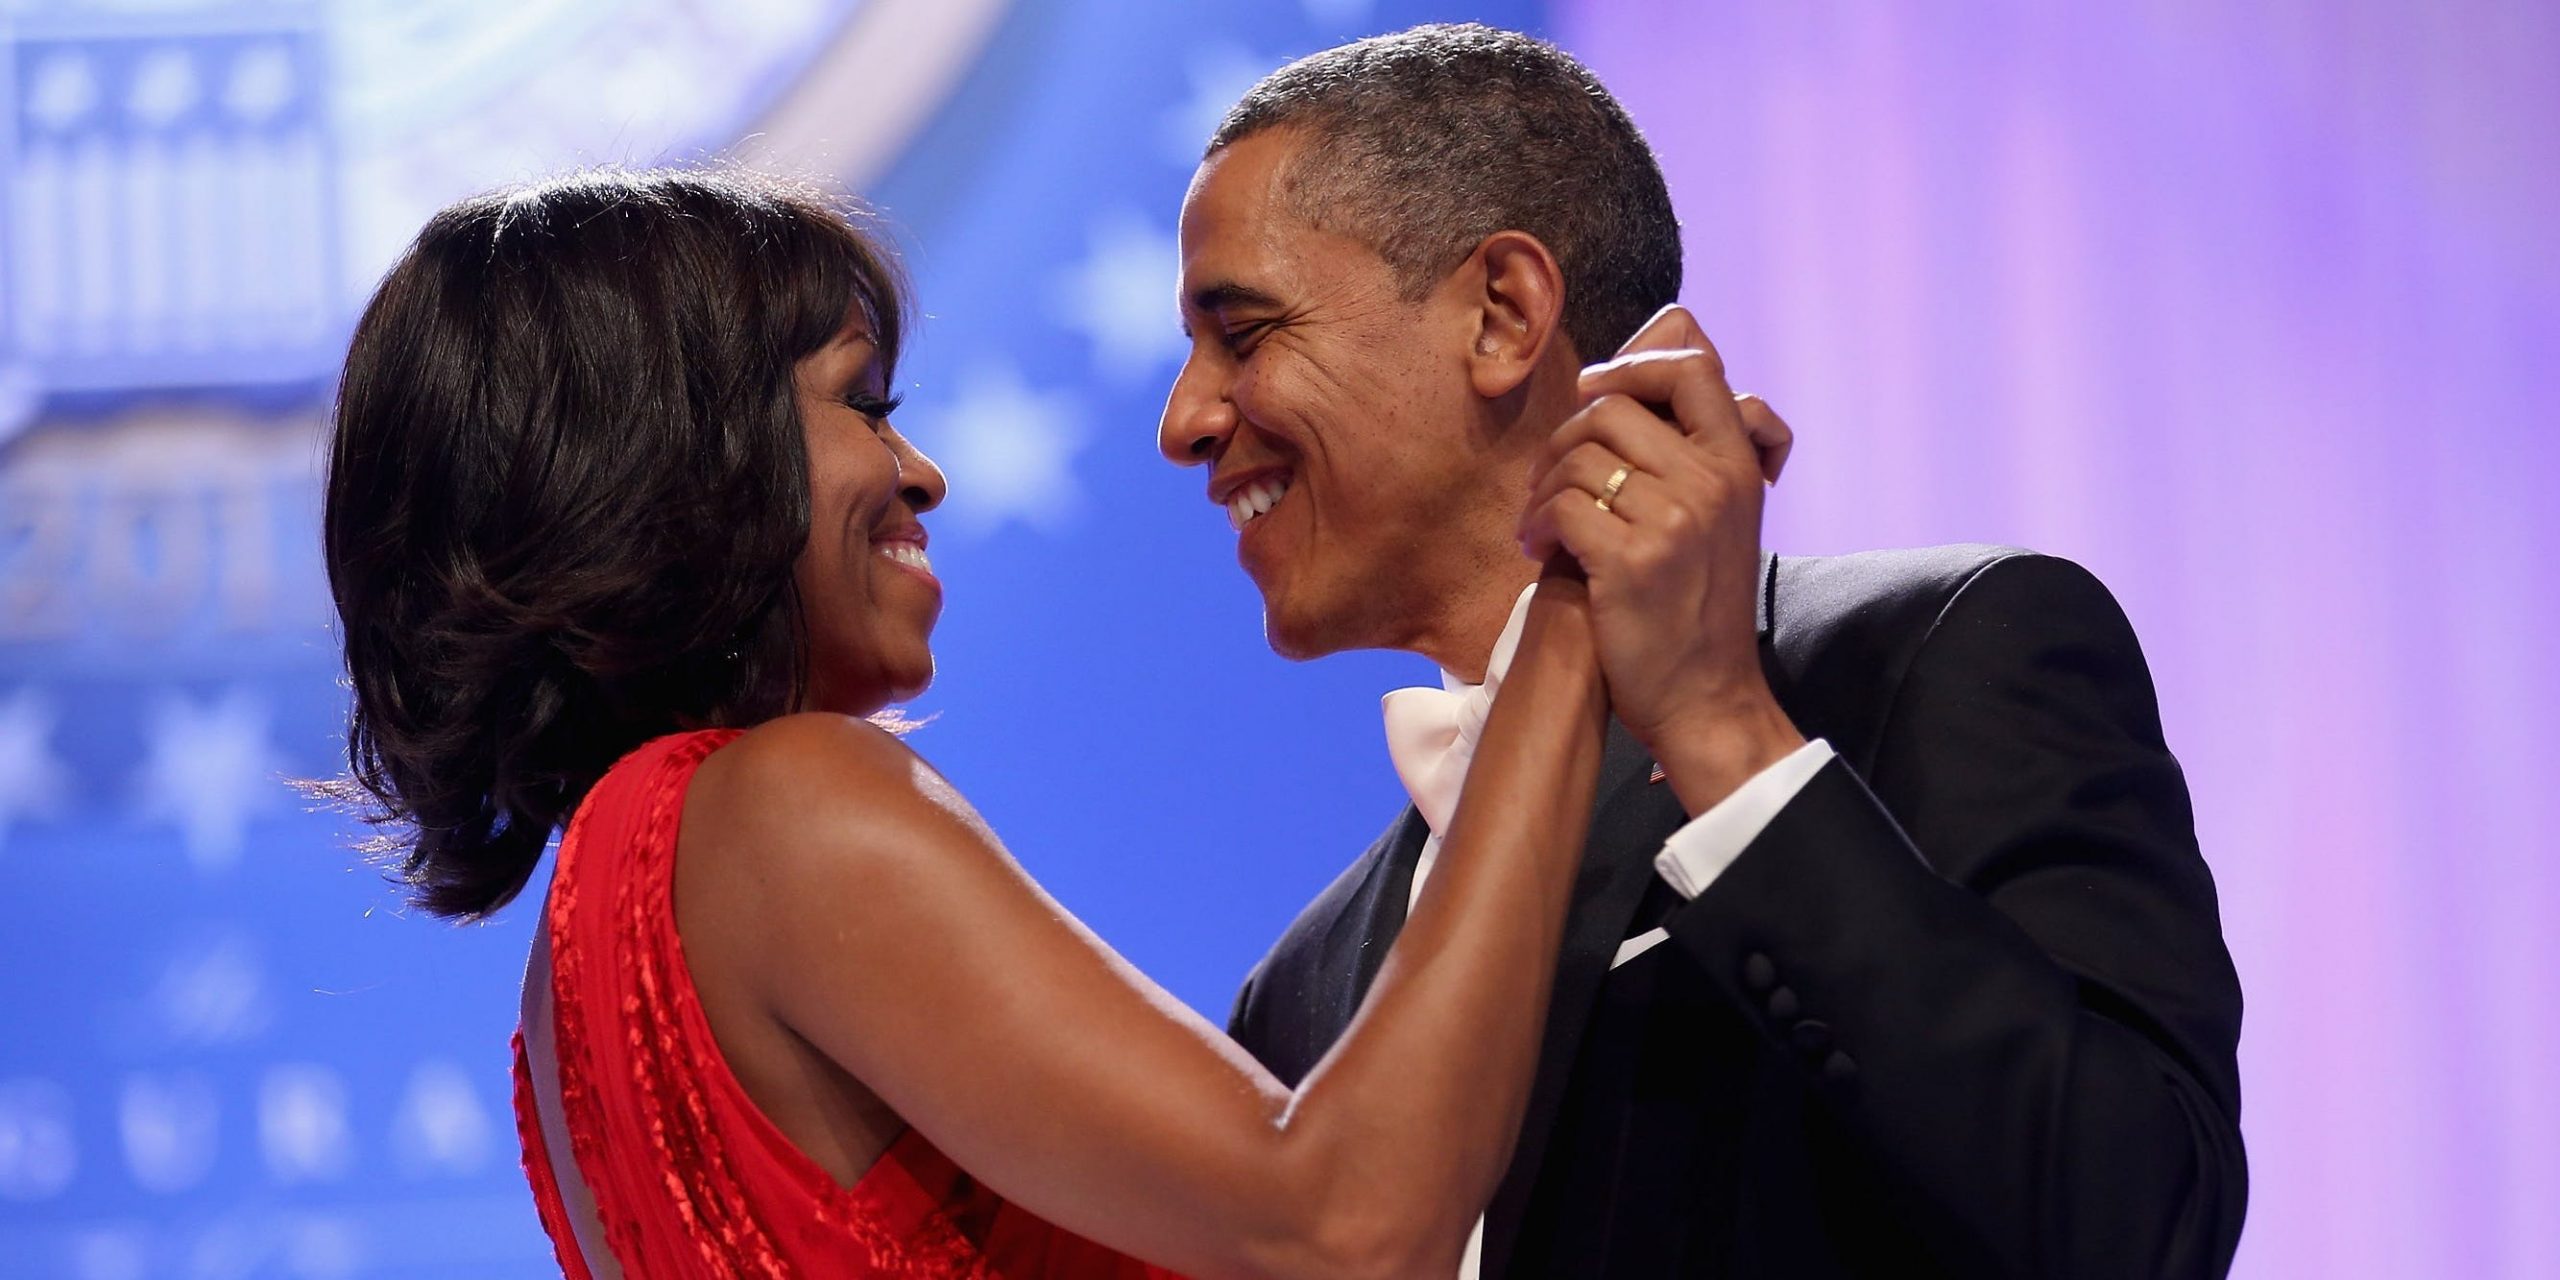 Barack and Michelle Obama's wedding anniversary was on October 3.